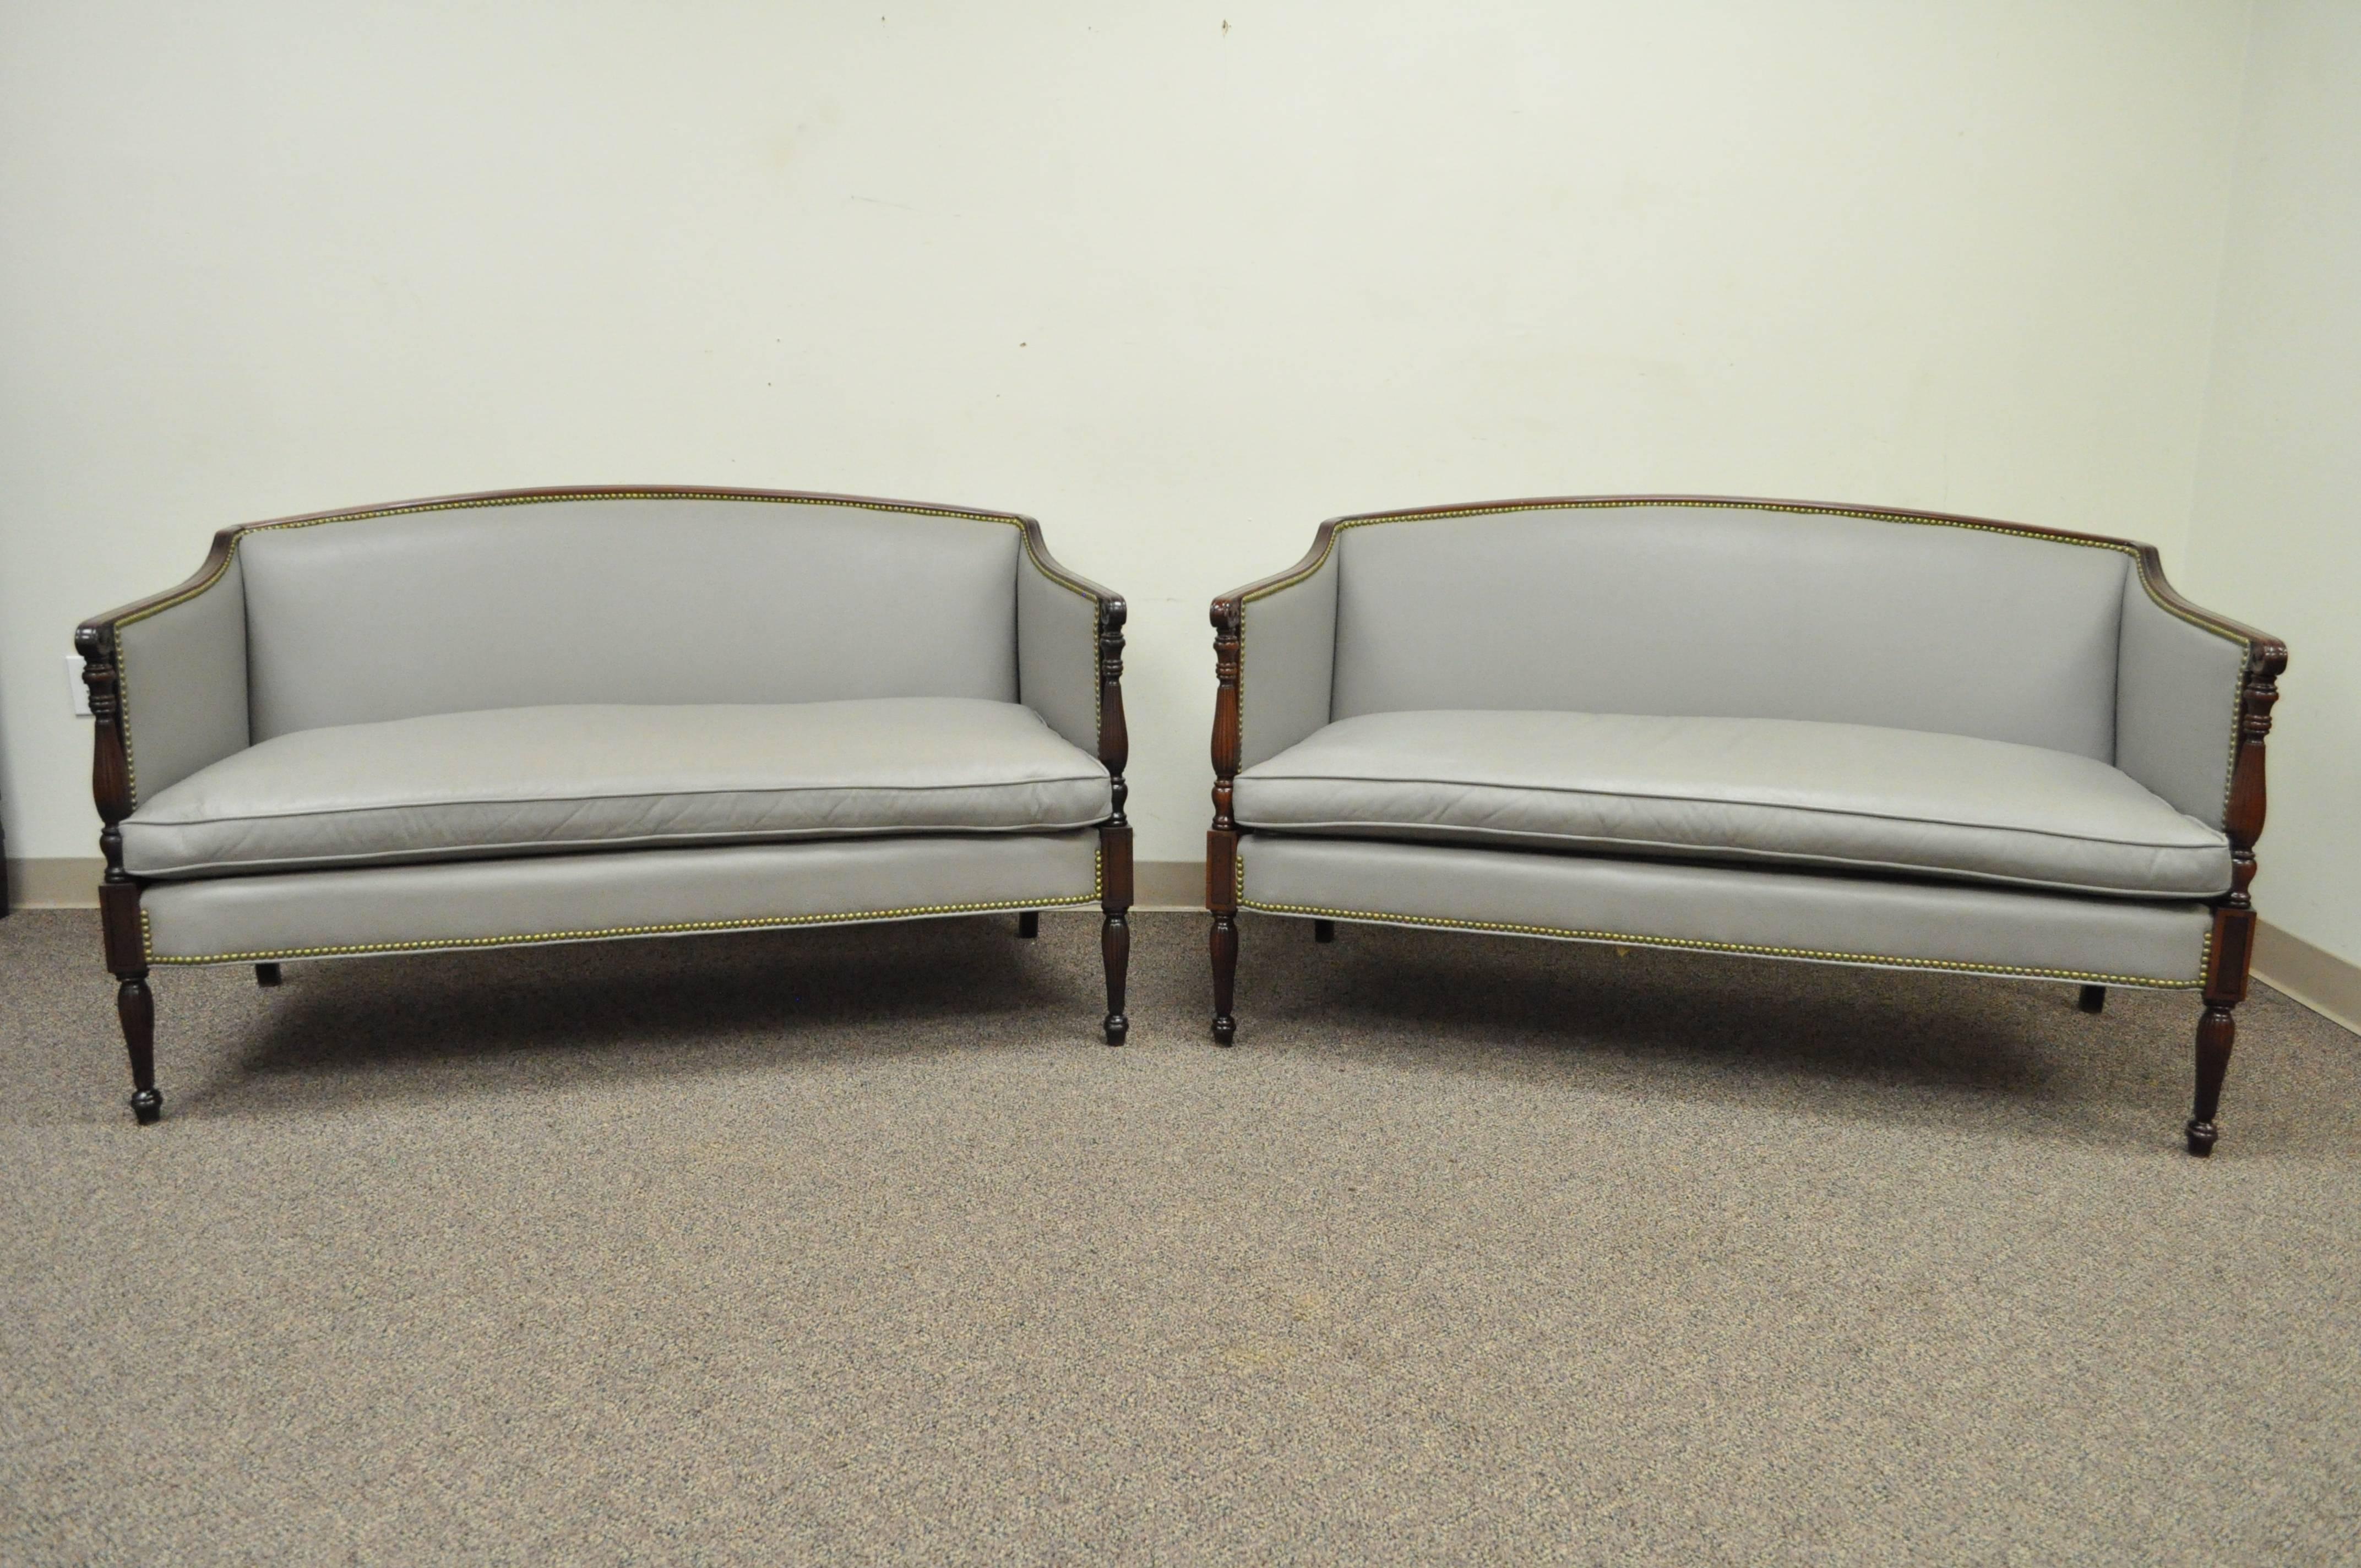 Pair of mahogany and grey leather vintage loveseats by Old Hickory Tannery. Item features original grey leather upholstery, carved solid mahogany frames, brass nailhead trim. Made in America. Measurements: 33.5